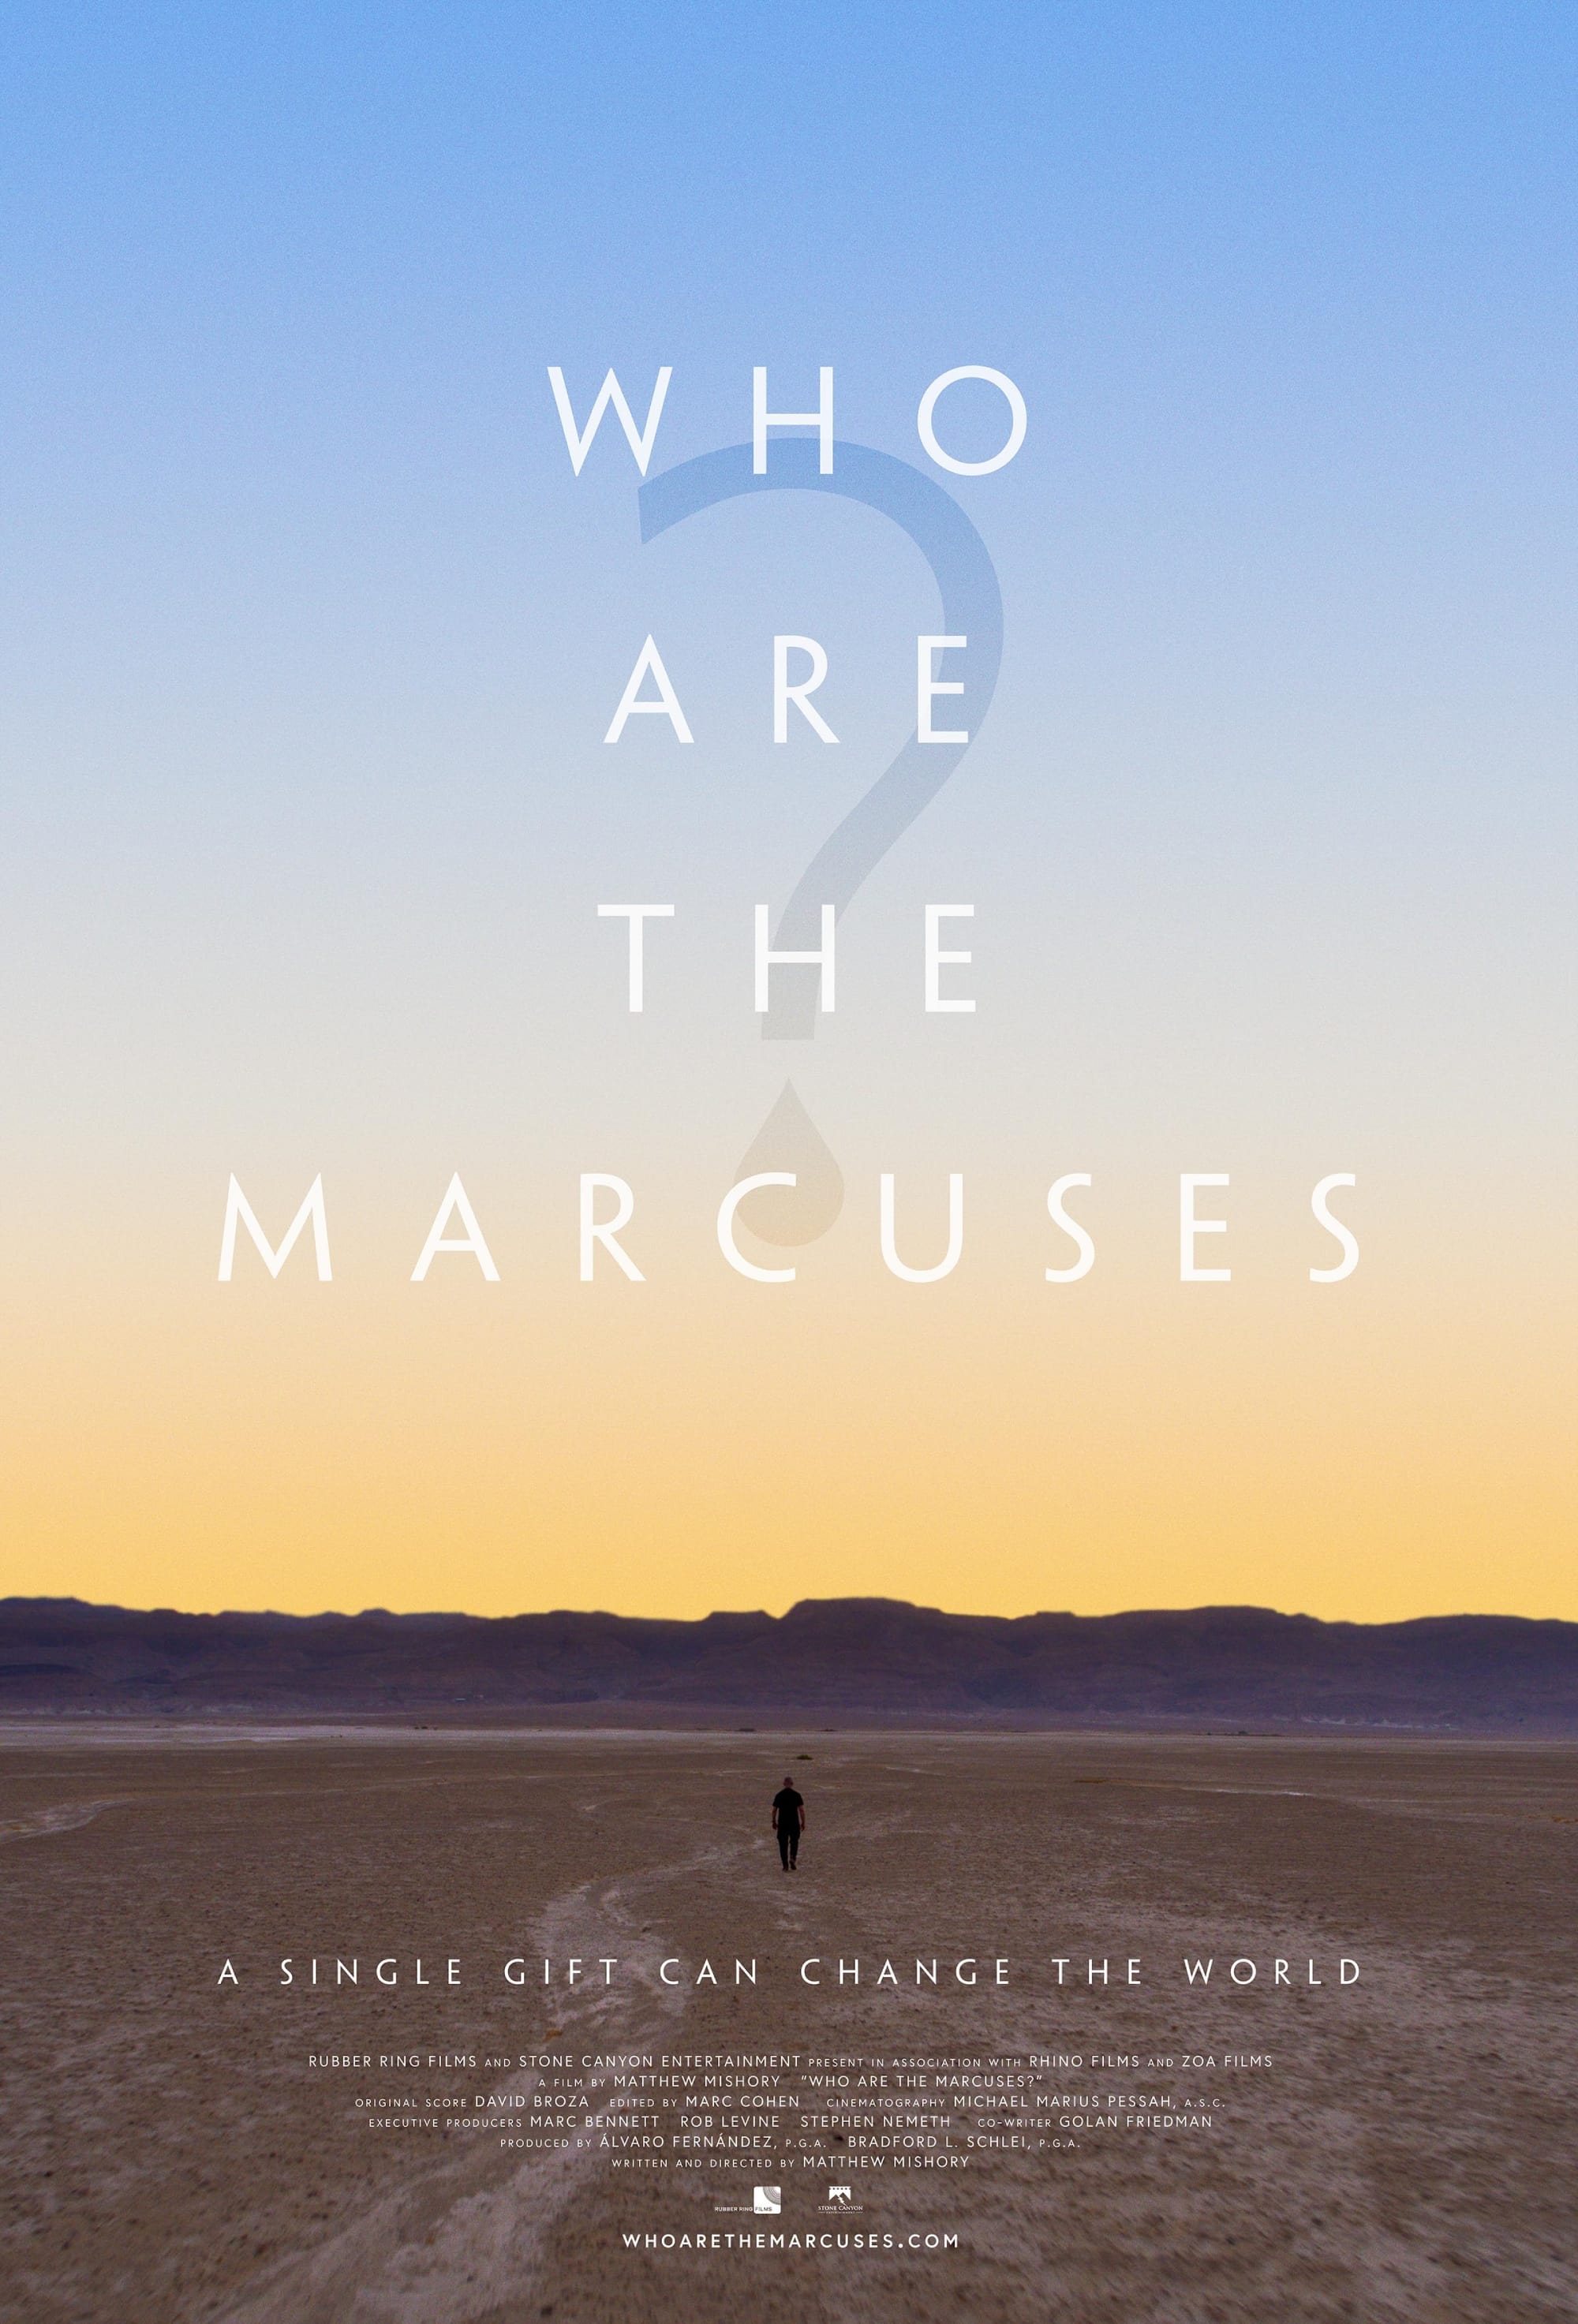 Who Are the Marcuses?